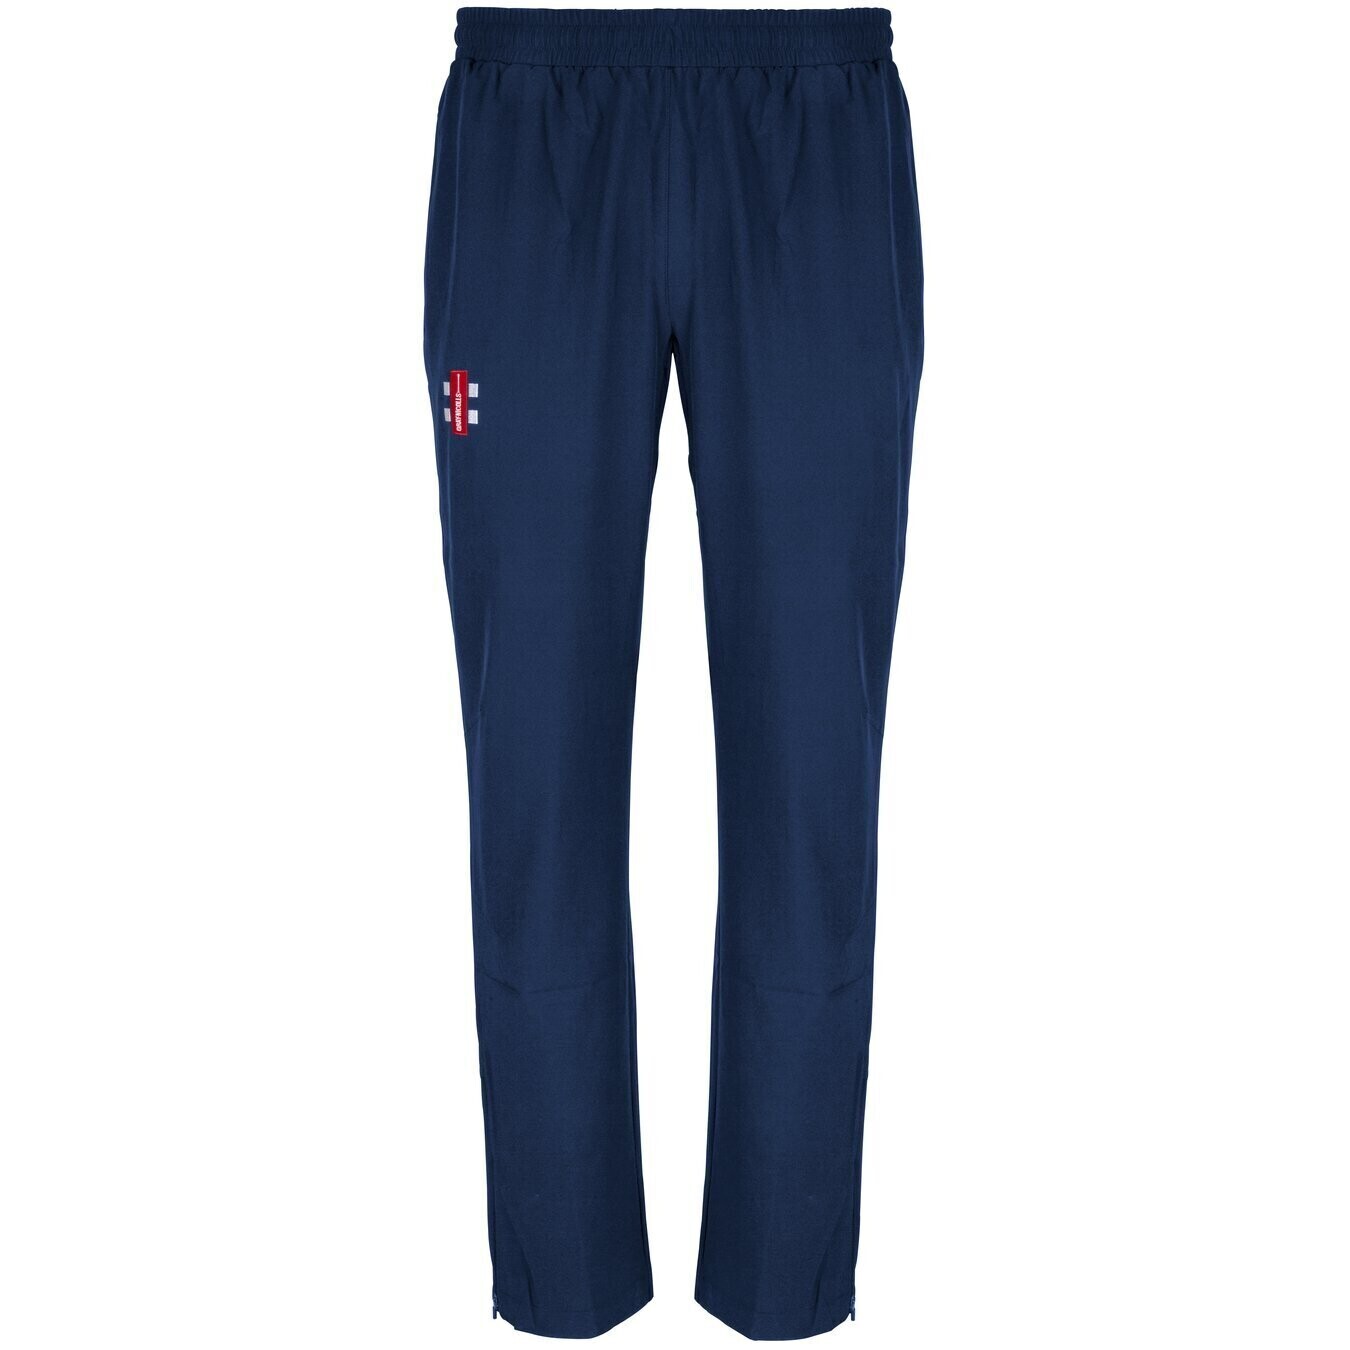 Dumfries Velocity Training Trousers